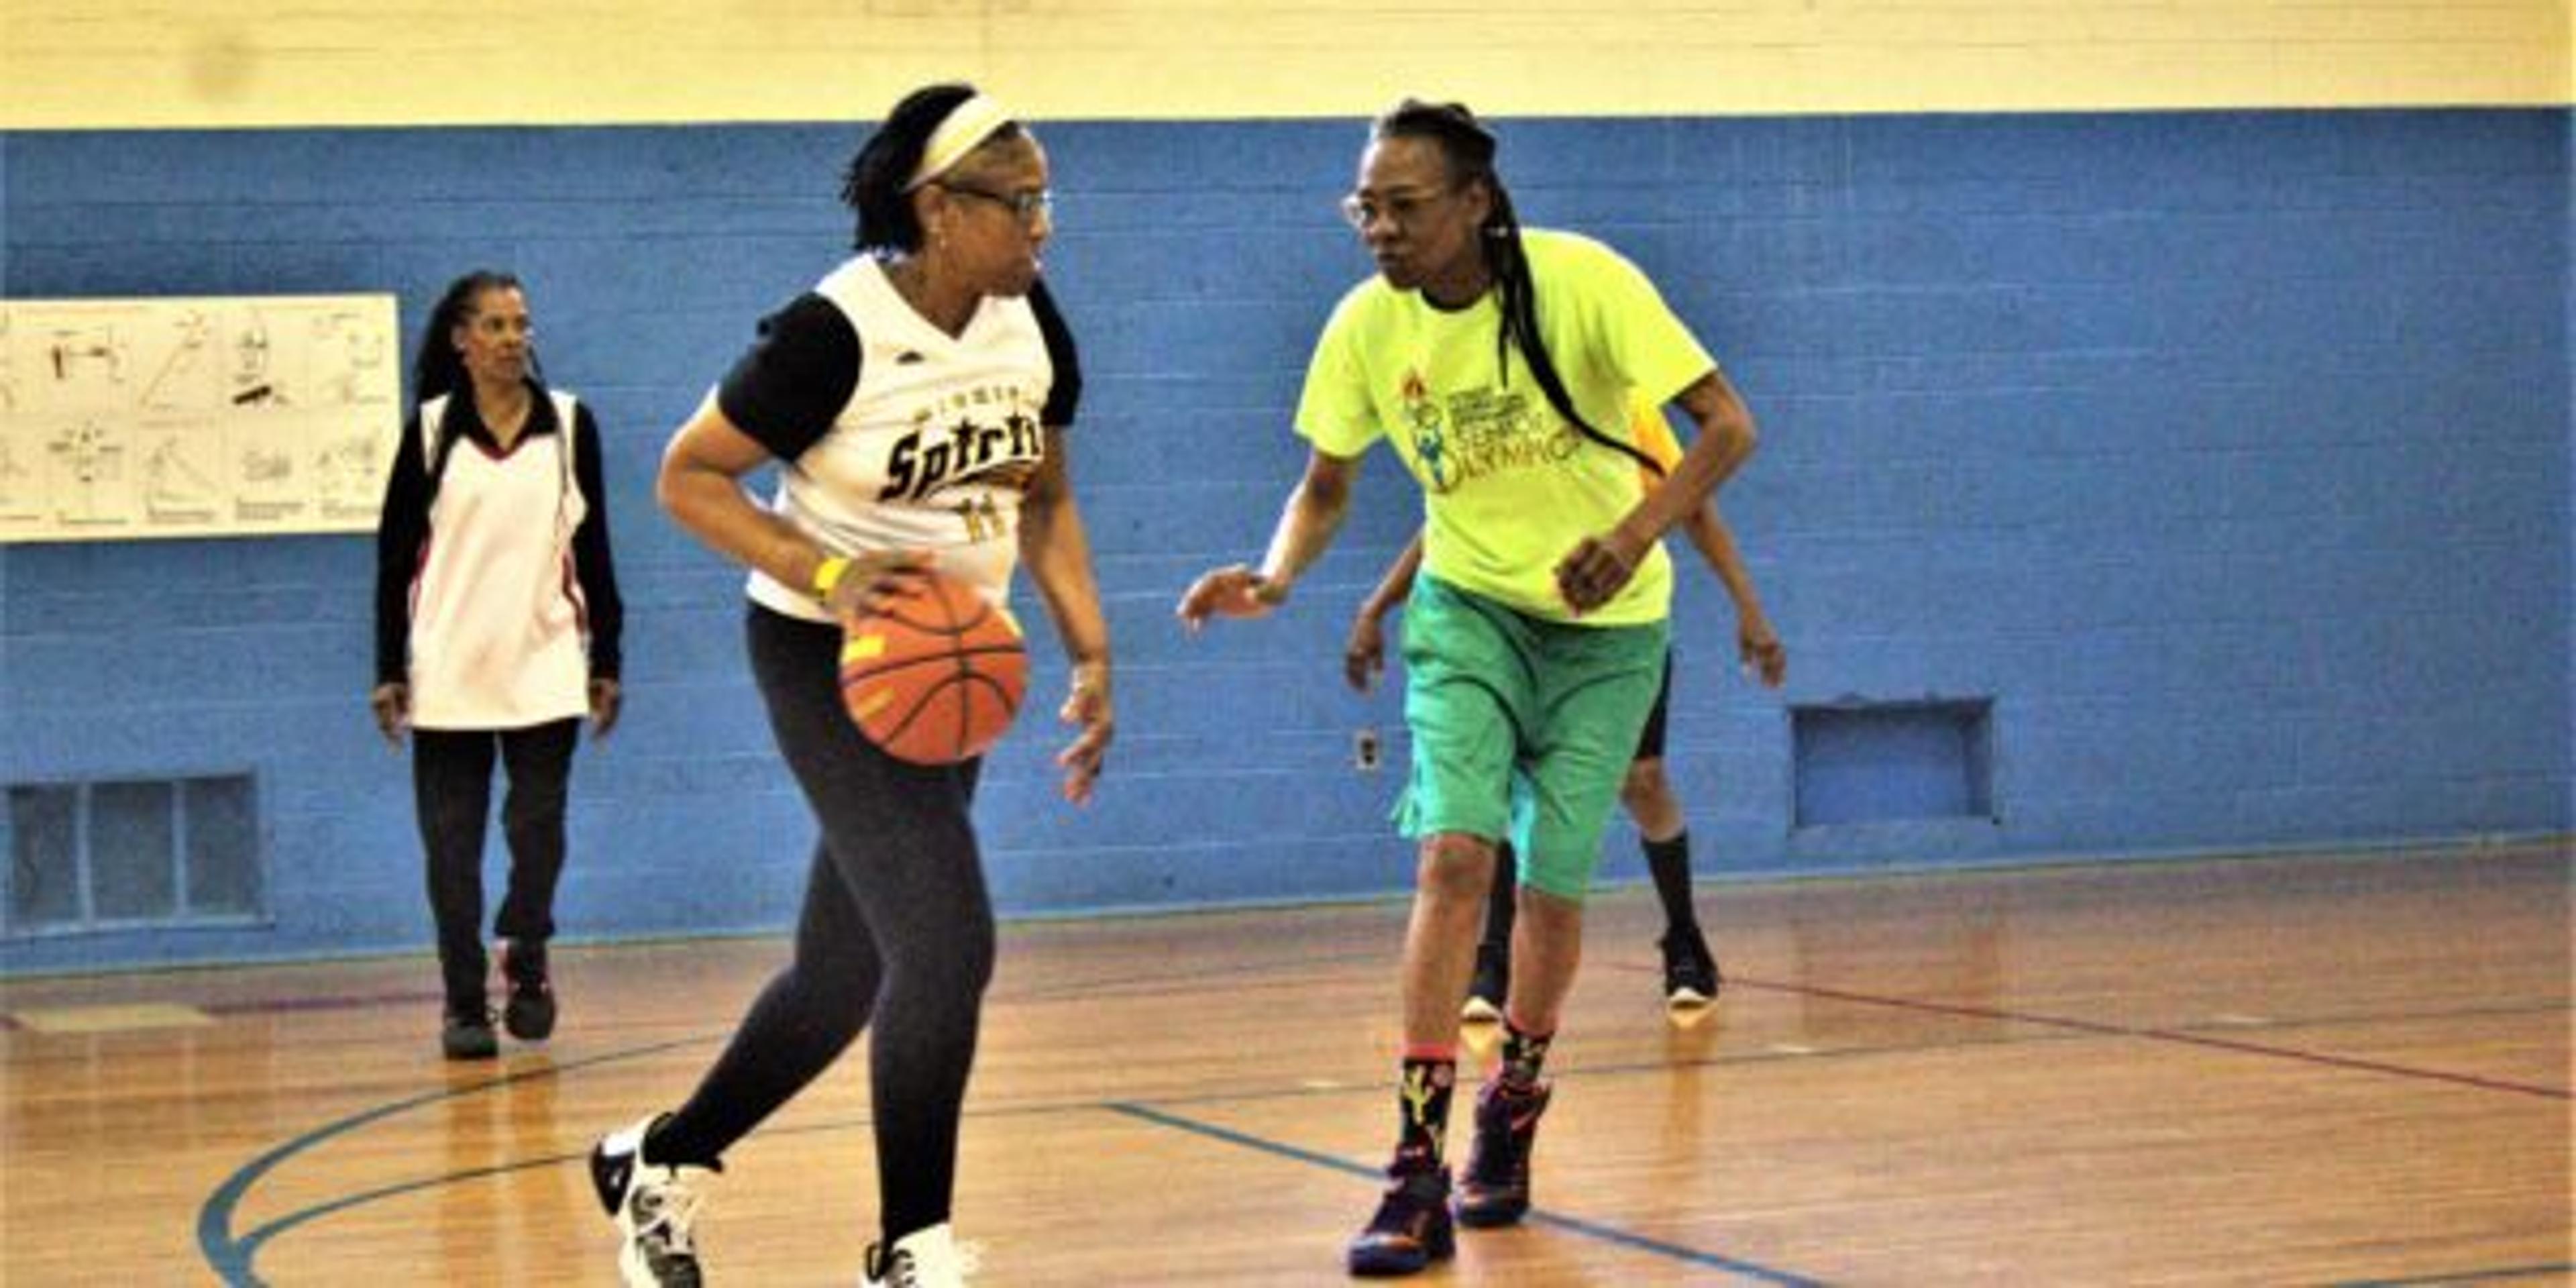 The Michigan Spirits senior women's basketball team practices at the Lasky Recreation Center in Detroit.